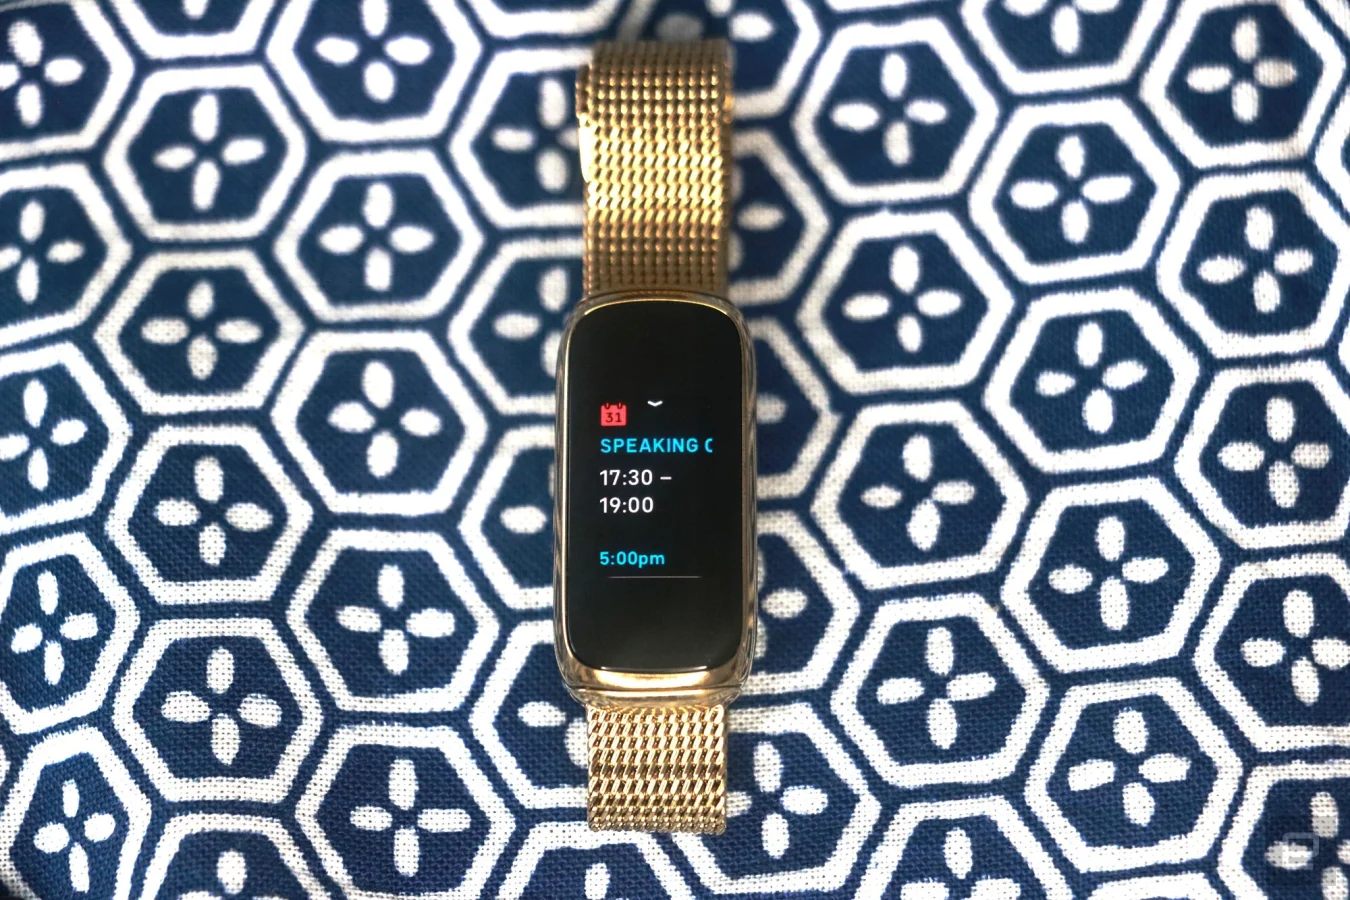 Front view of the Fitbit Luxe with a gold mesh bracelet on a patterned blue and white background. Its screen shows a calendar notification for an event from 5:30pm to 7pm.